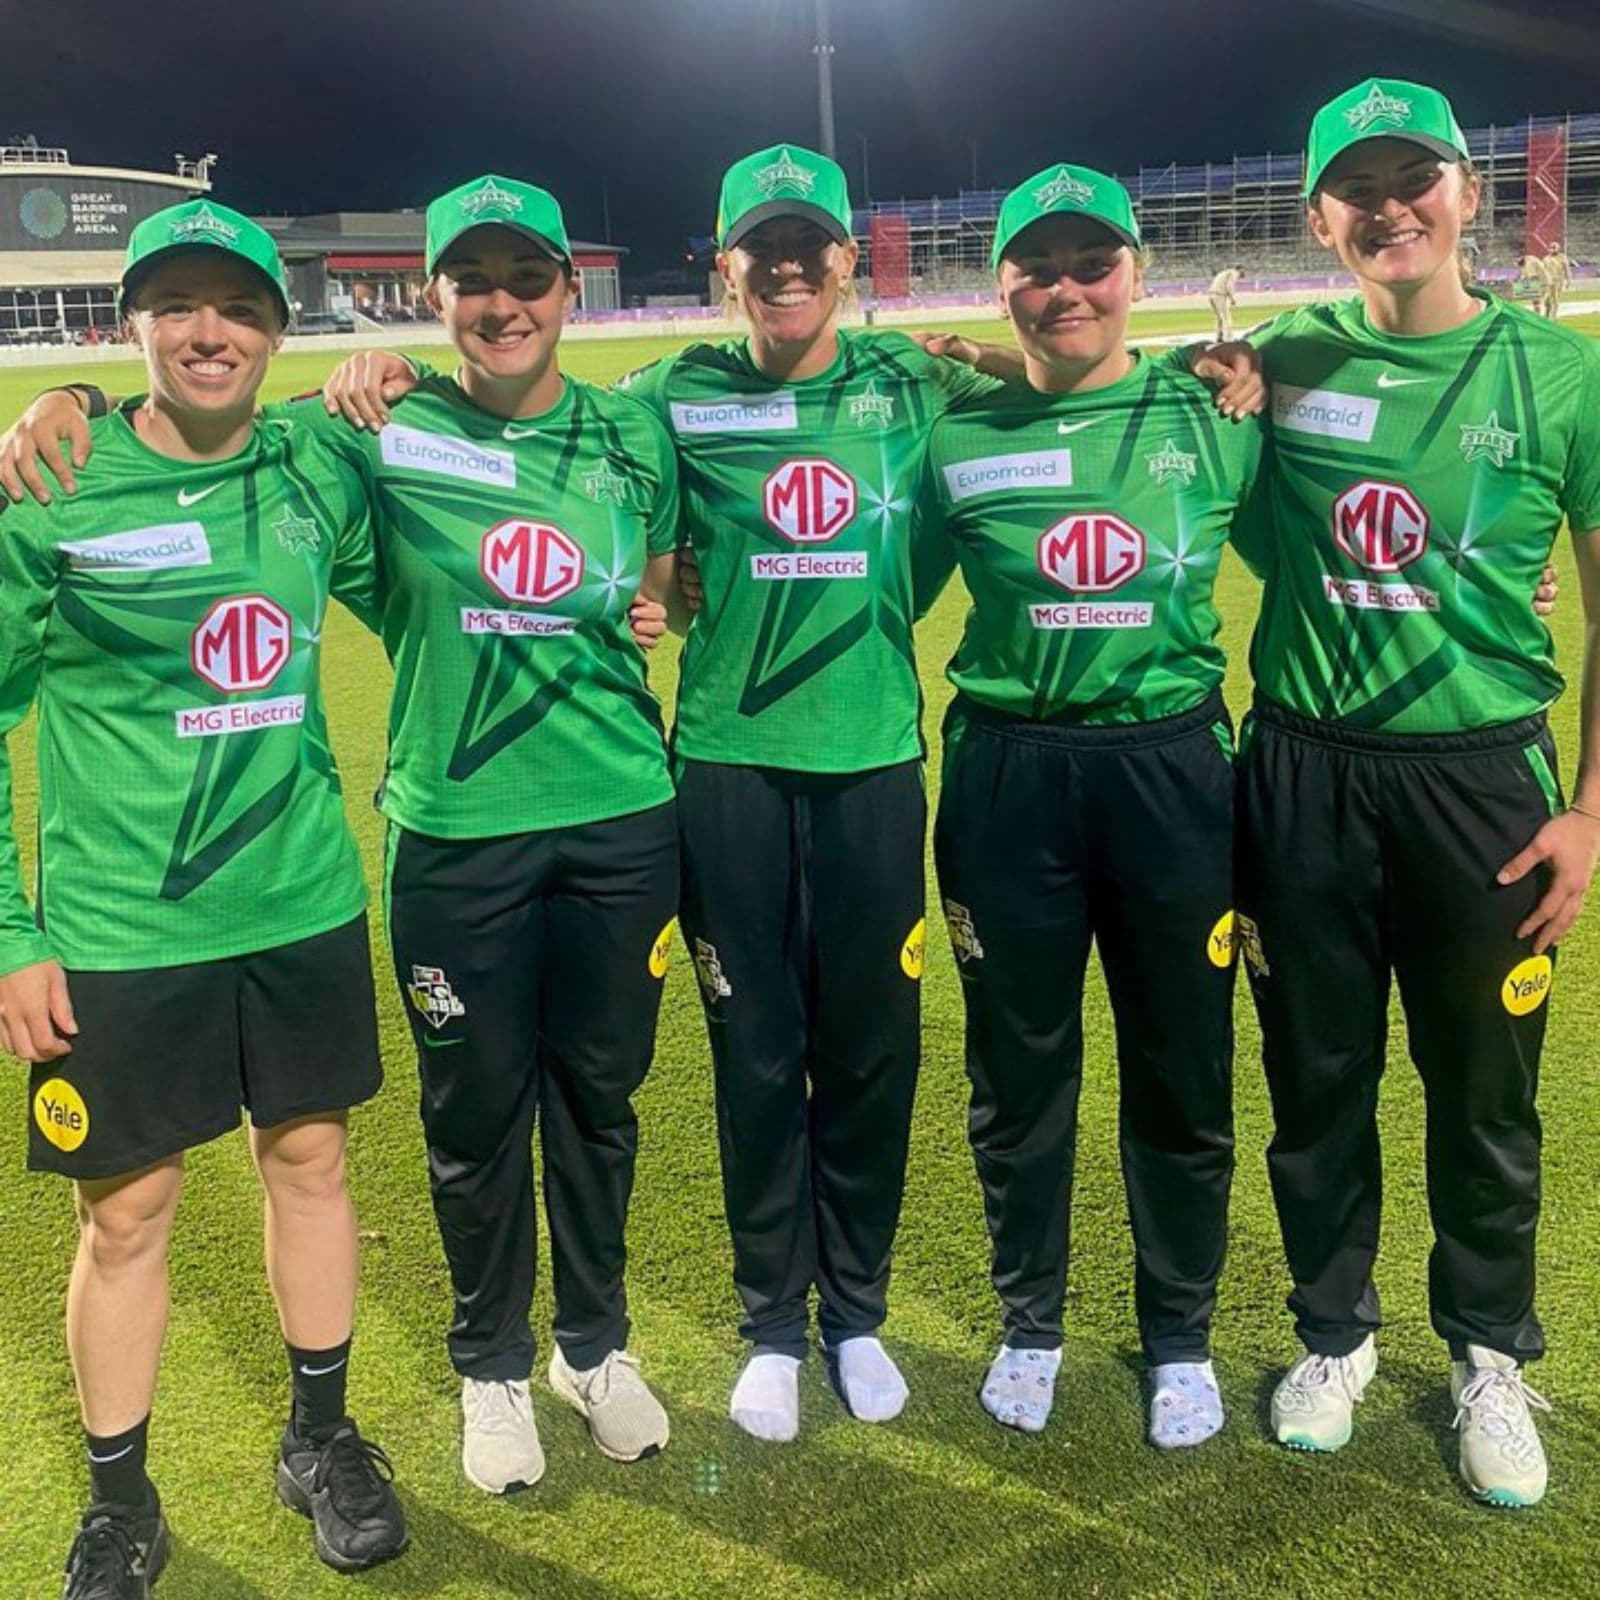 WBBL 2022-23, Melbourne Stars vs Sydney Sixers Live Streaming When and Where to Watch Womens Big Bash League Coverage on Live TV, Online